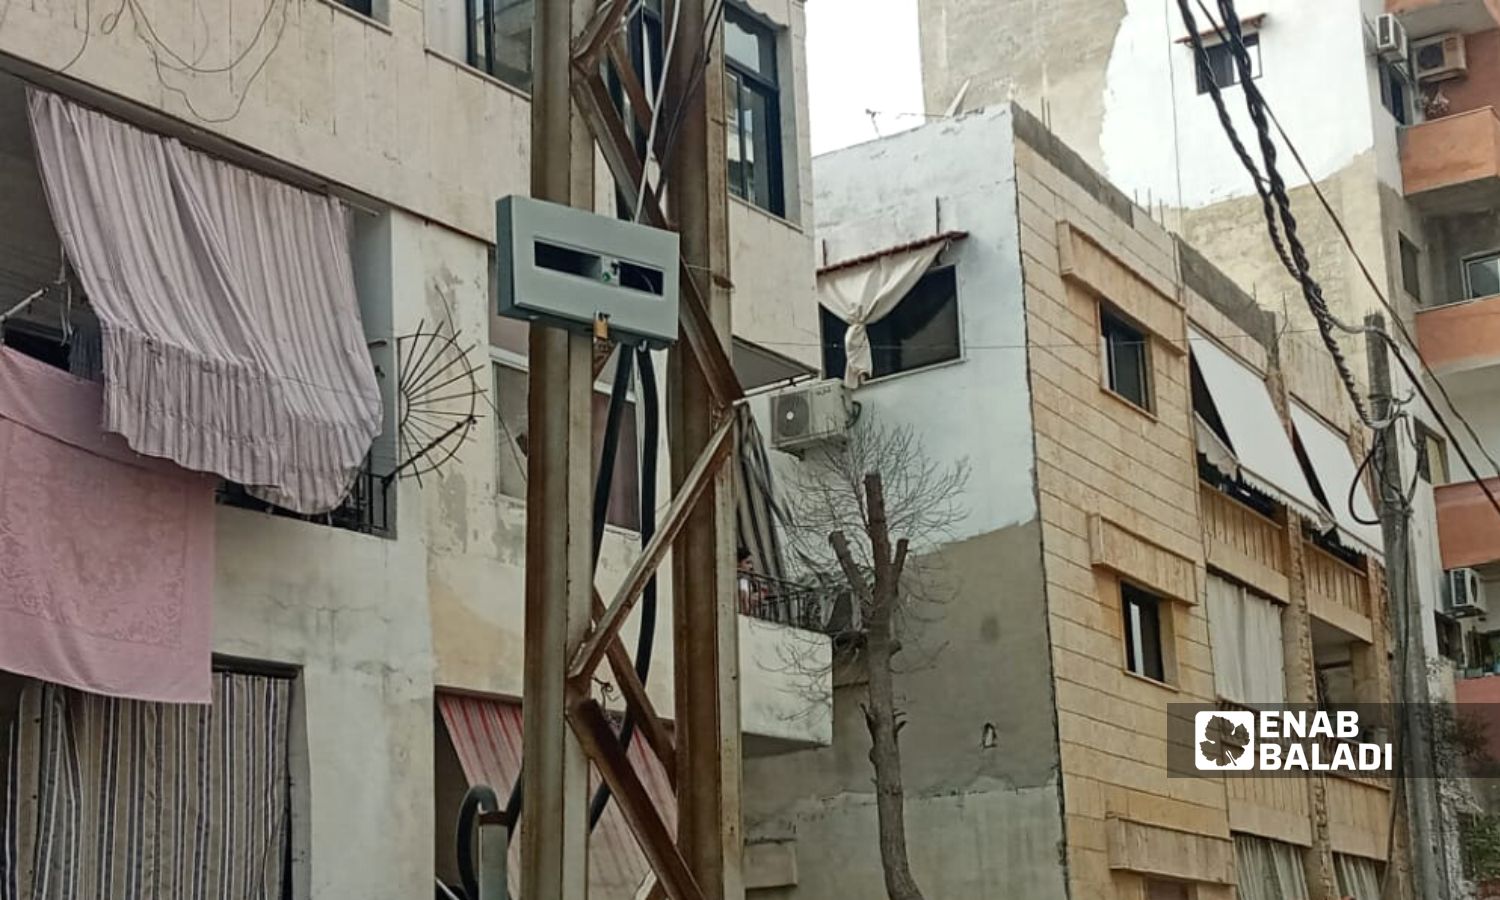 A meter for one of the electricity subscription generators in the al-Qalaa neighborhood (Buildings of April 7th) in the coastal city of Latakia - September 2022 (Enab Baladi)